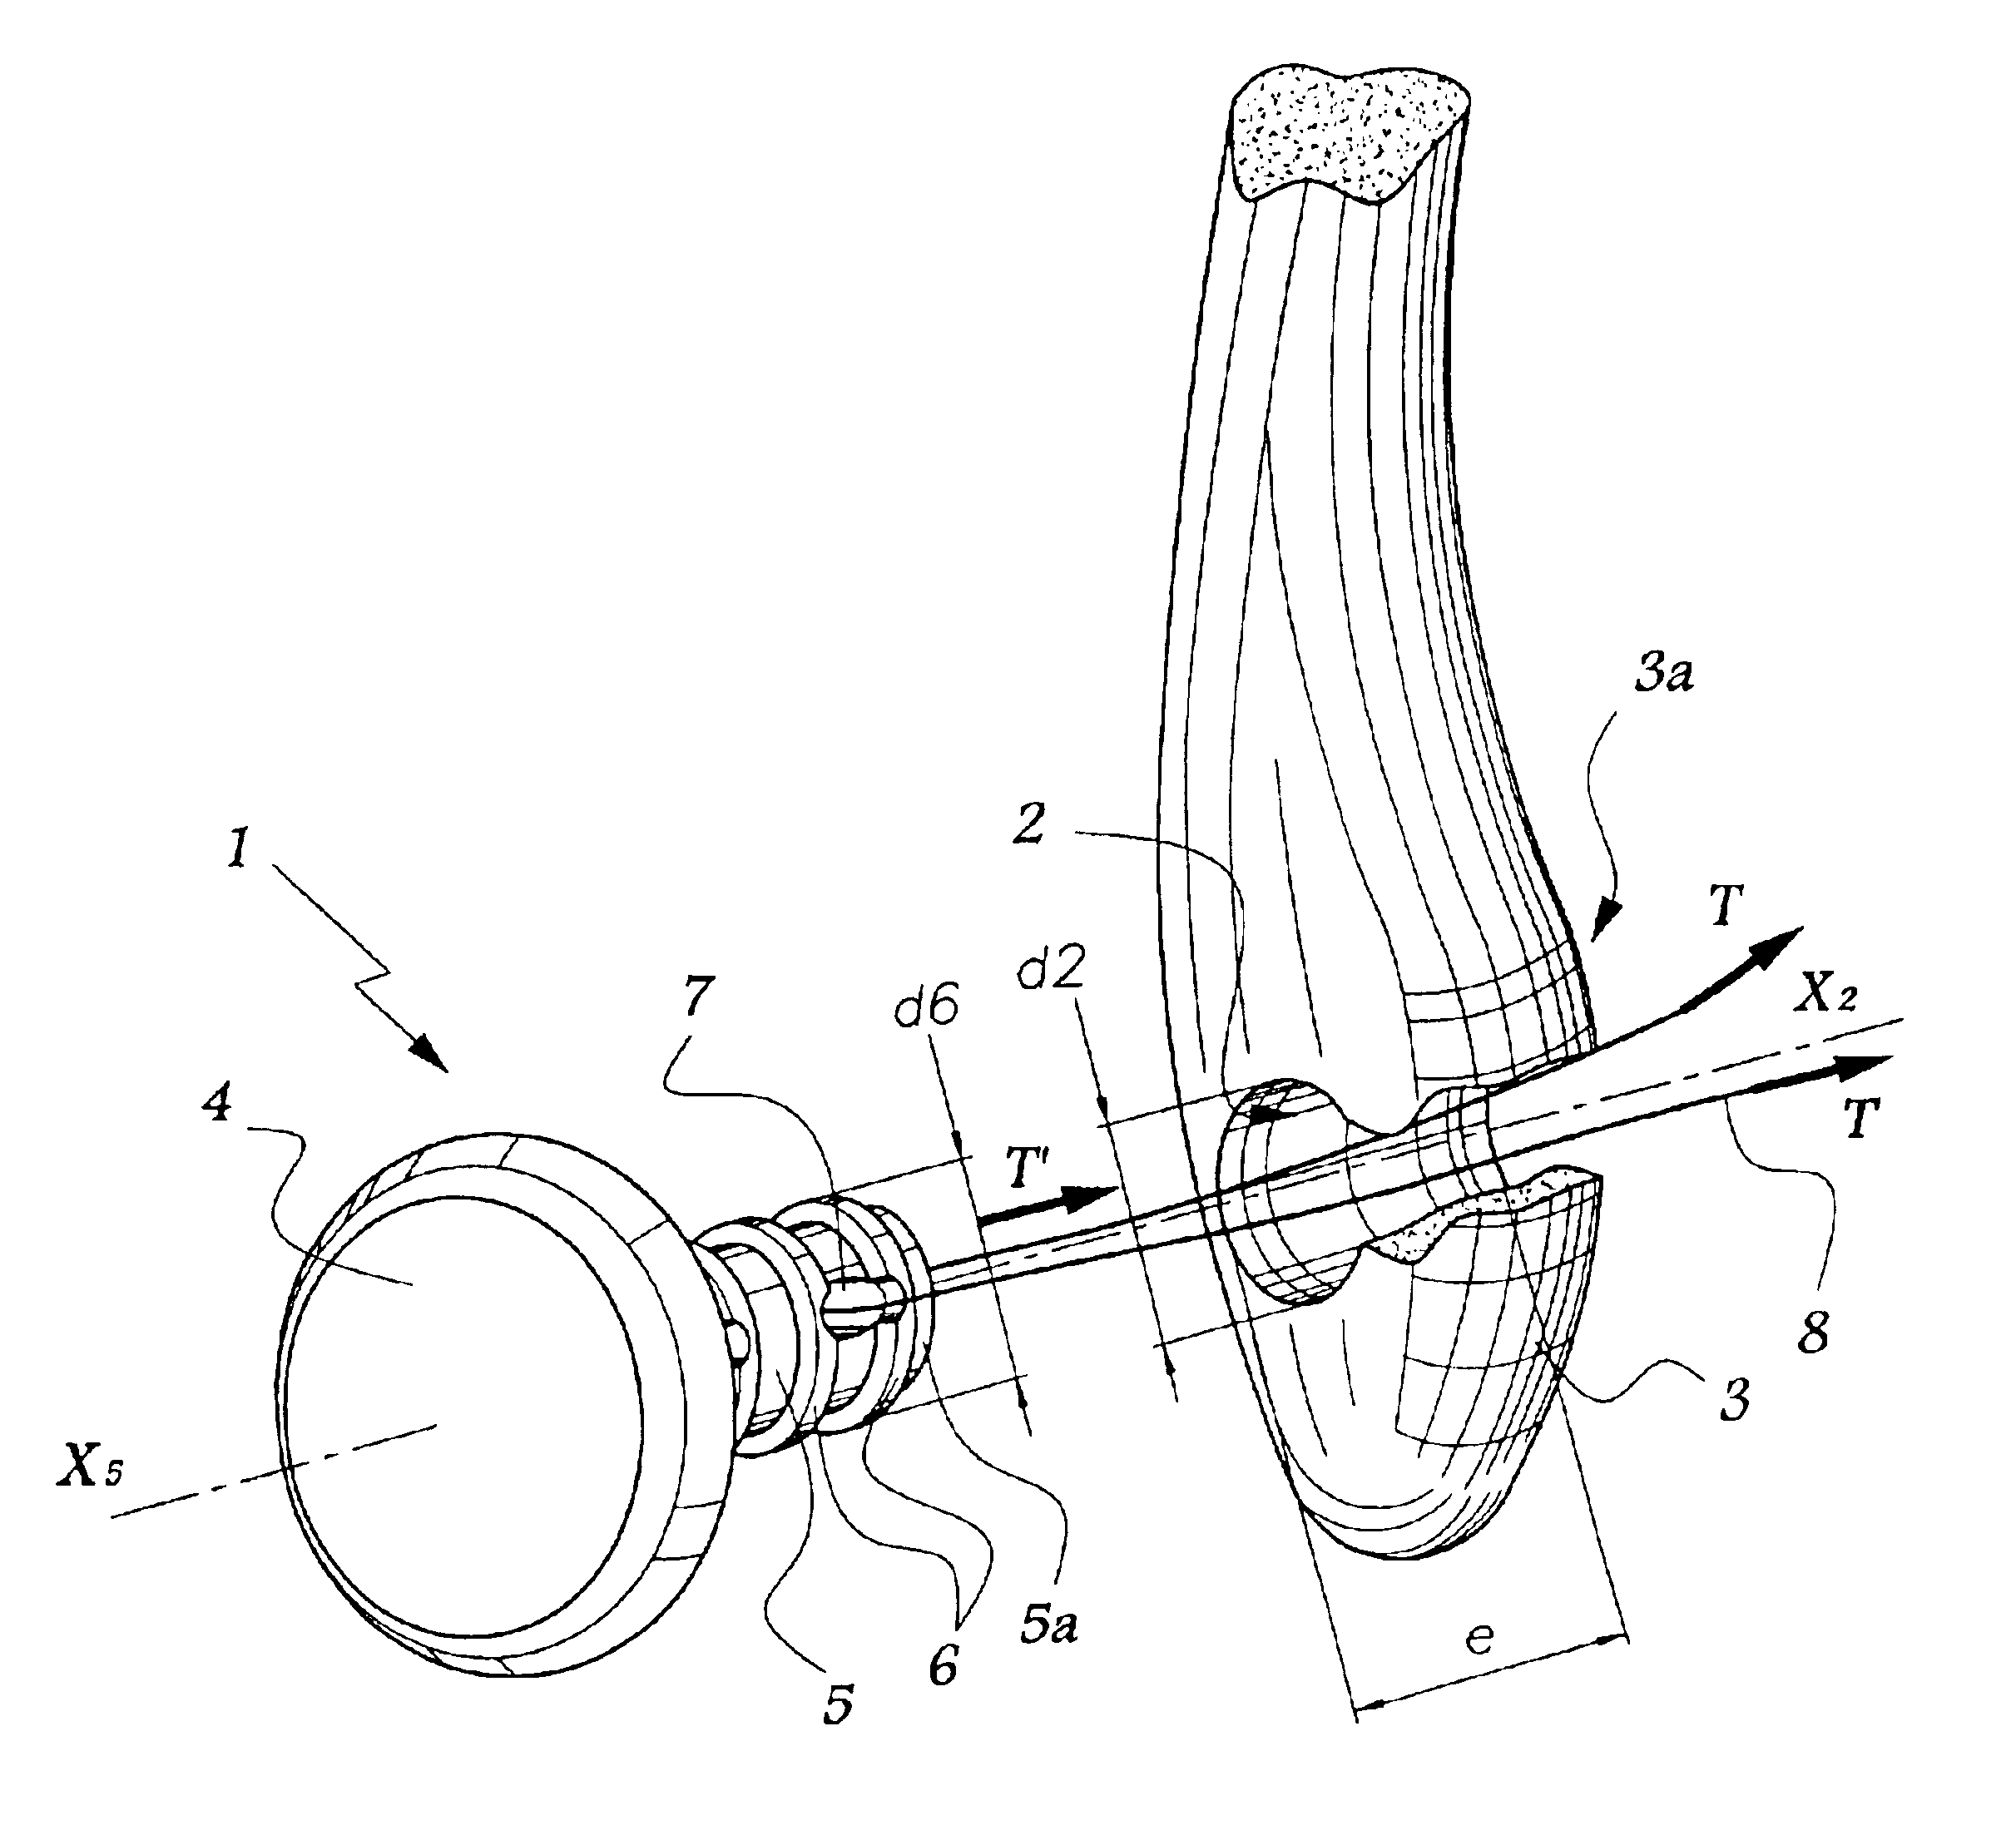 Method of positioning a malleolar implant for partial or total ankle prosthesis